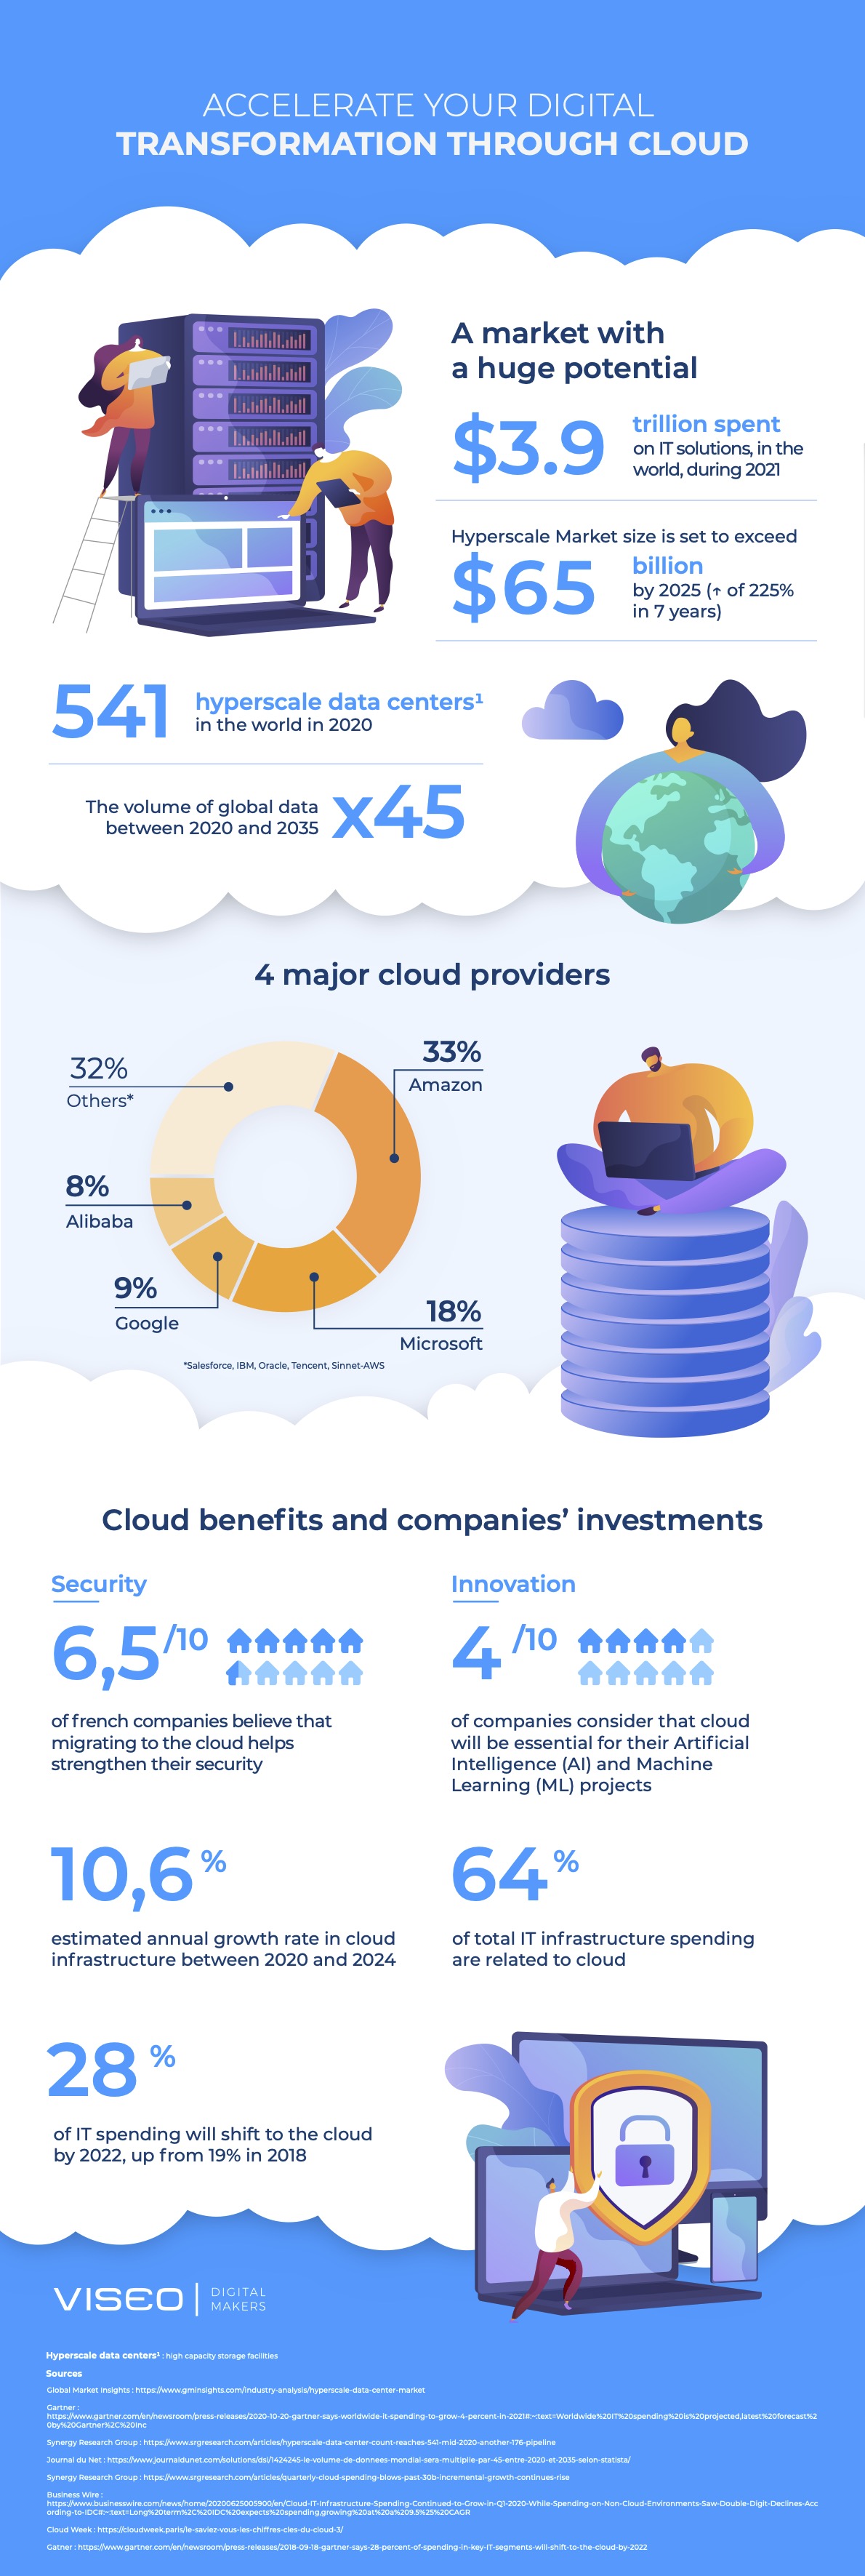 Cloud Infographic by VISEO